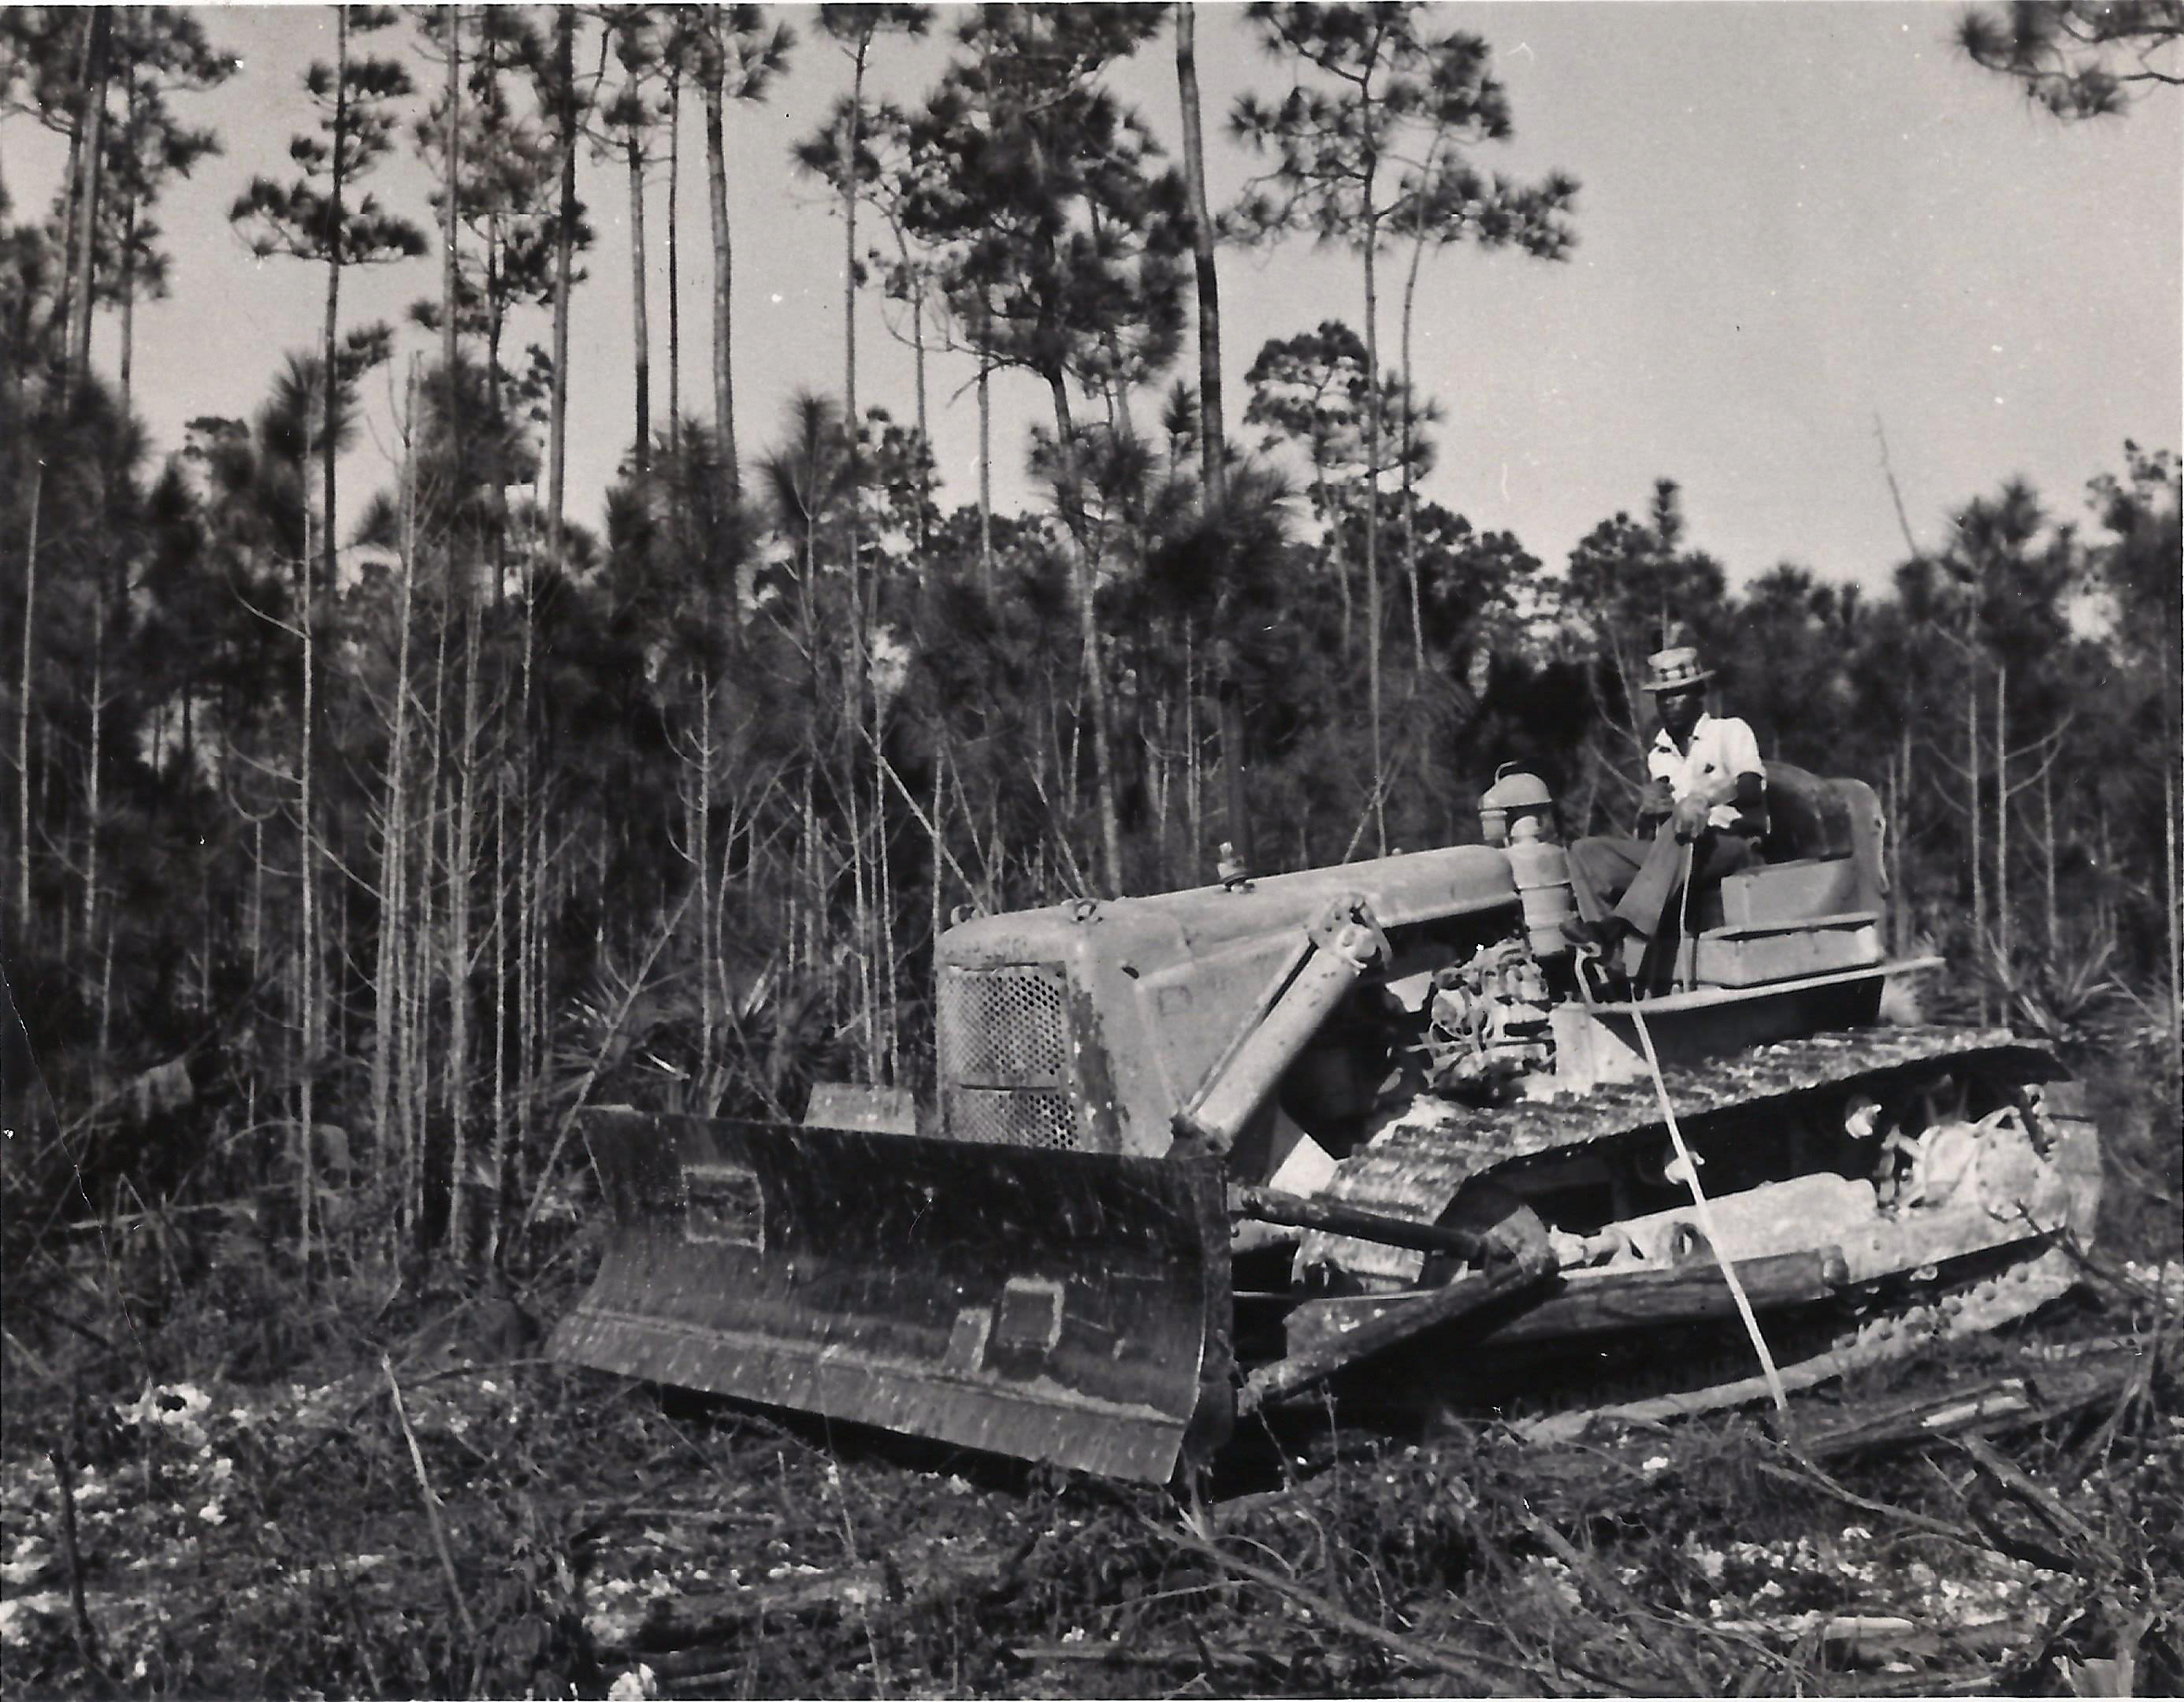 Bulldozing paths into the pine forests, 1950's